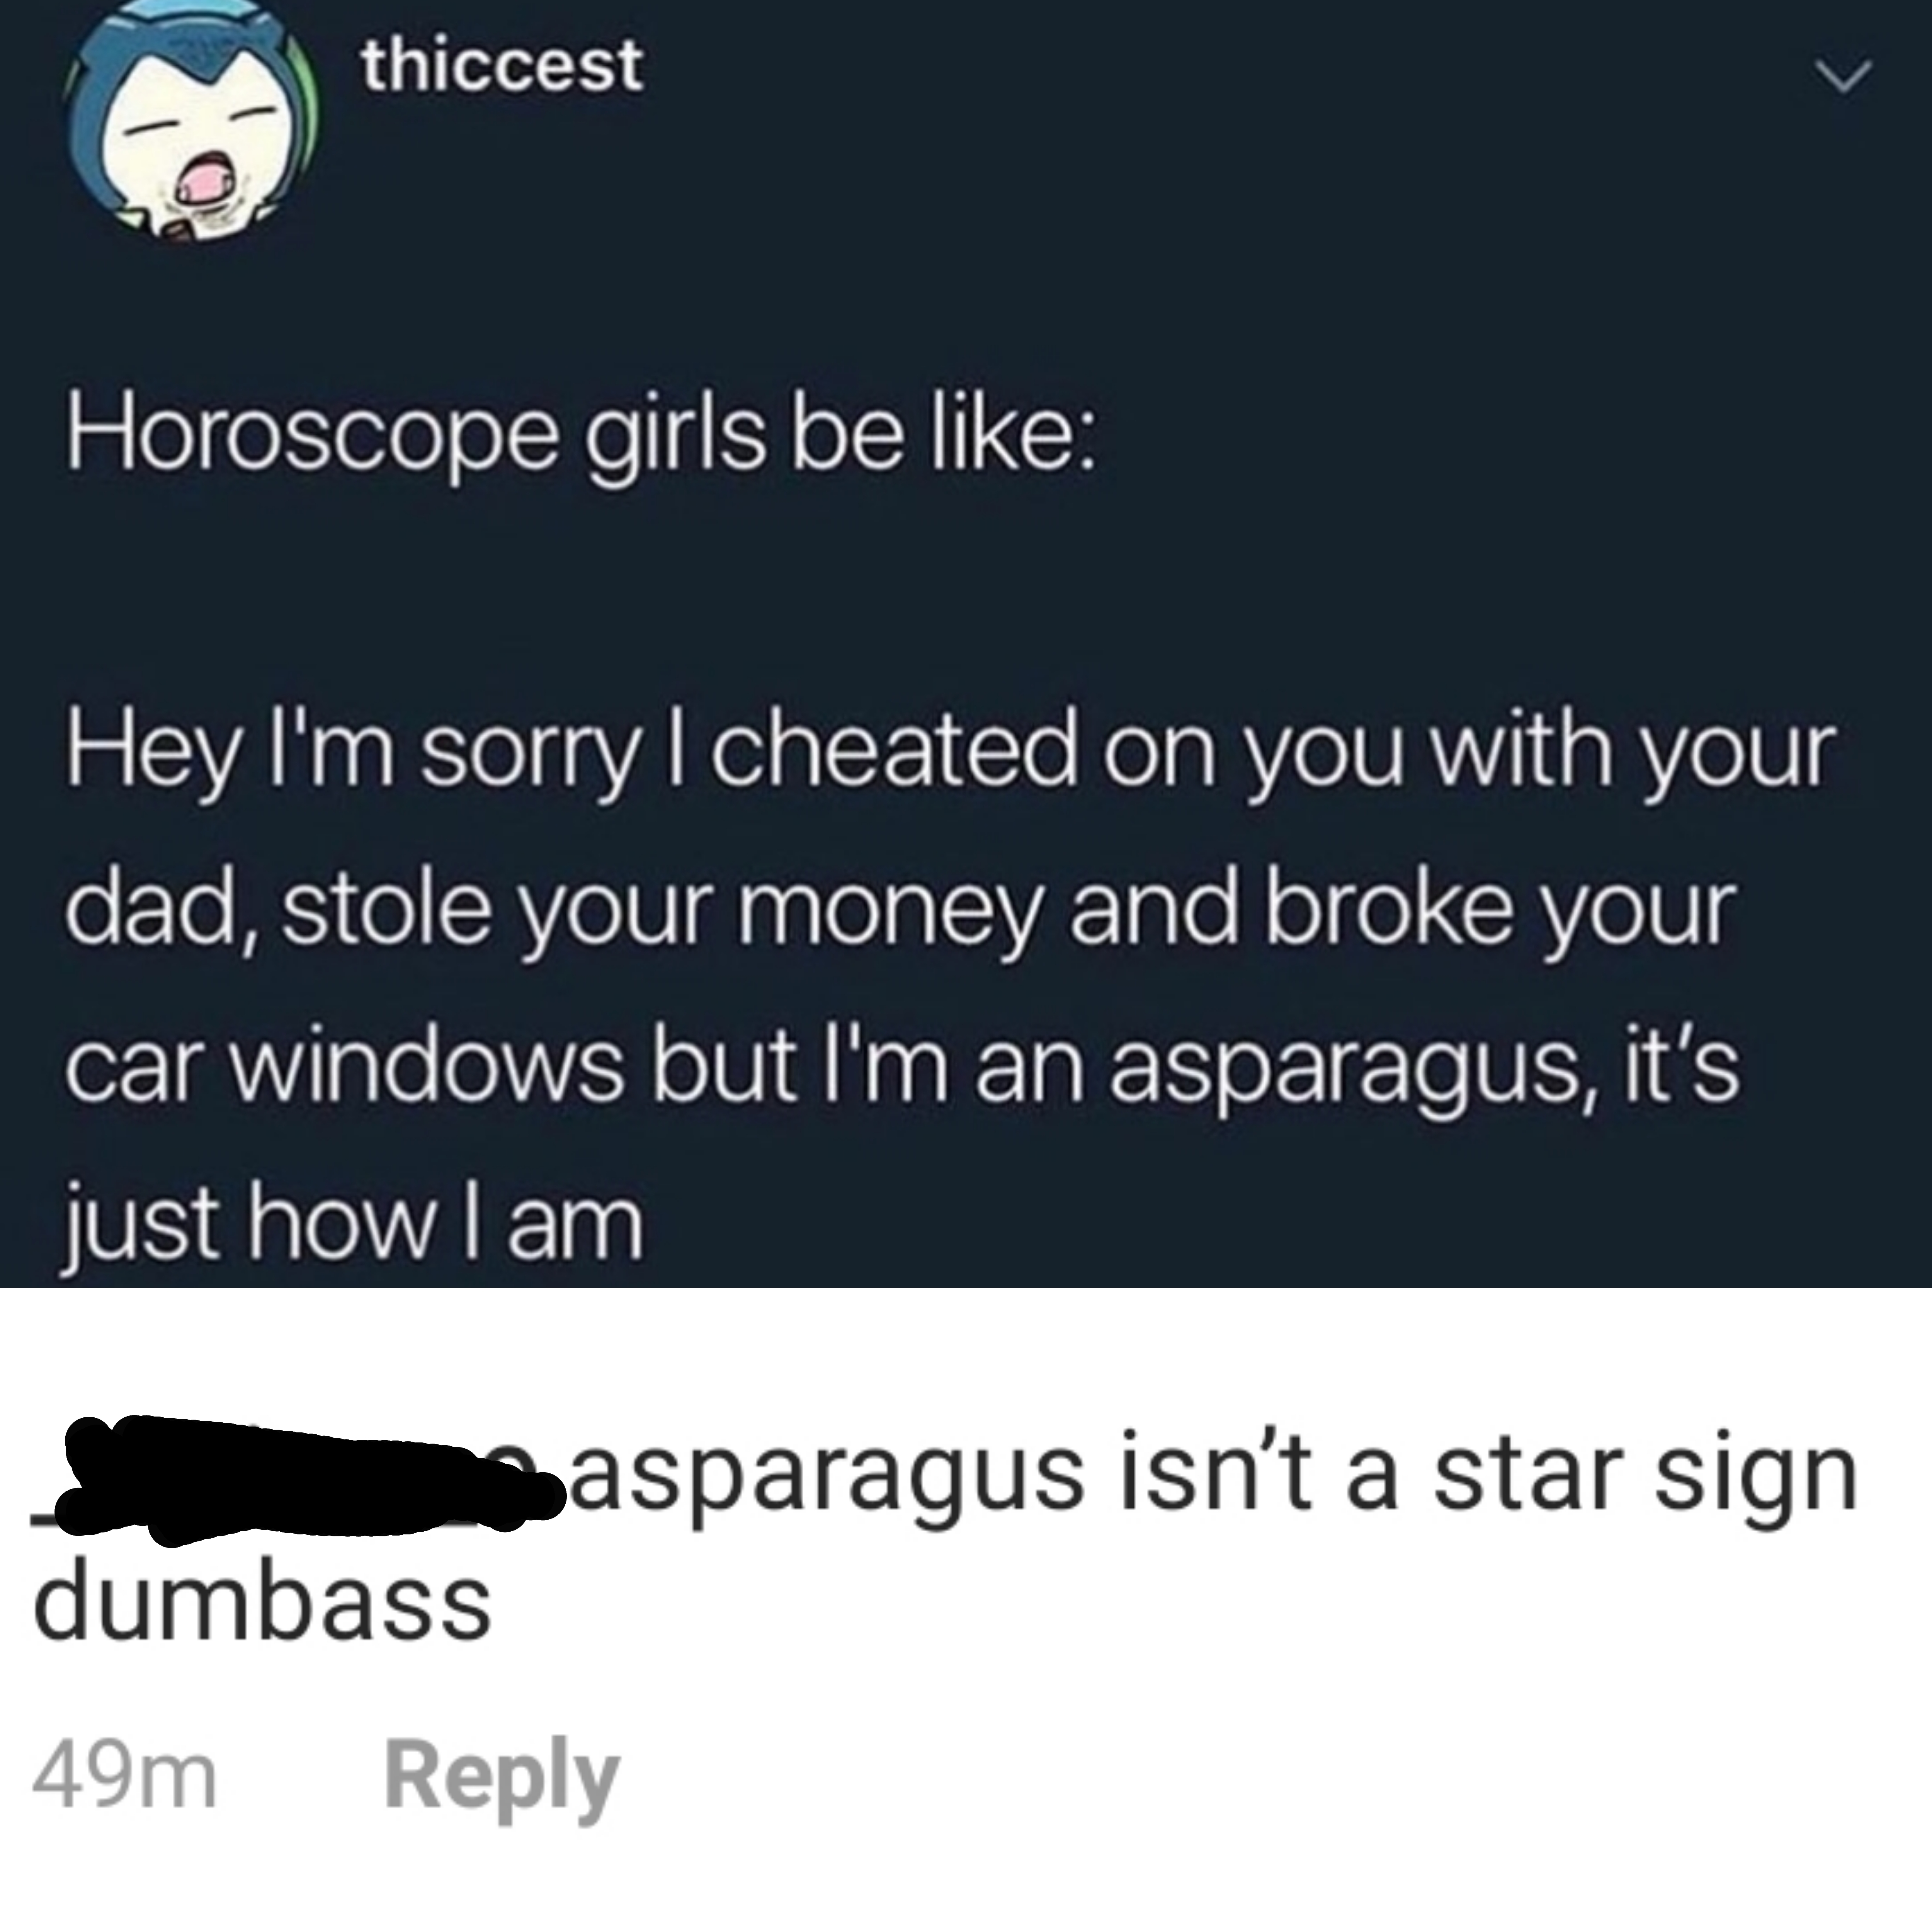 i m an asparagus - thiccest Horoscope girls be Hey I'm sorry I cheated on you with your dad, stole your money and broke your car windows but I'm an asparagus, it's just how I am Wasparagus isn't a star sign dumbass 49m